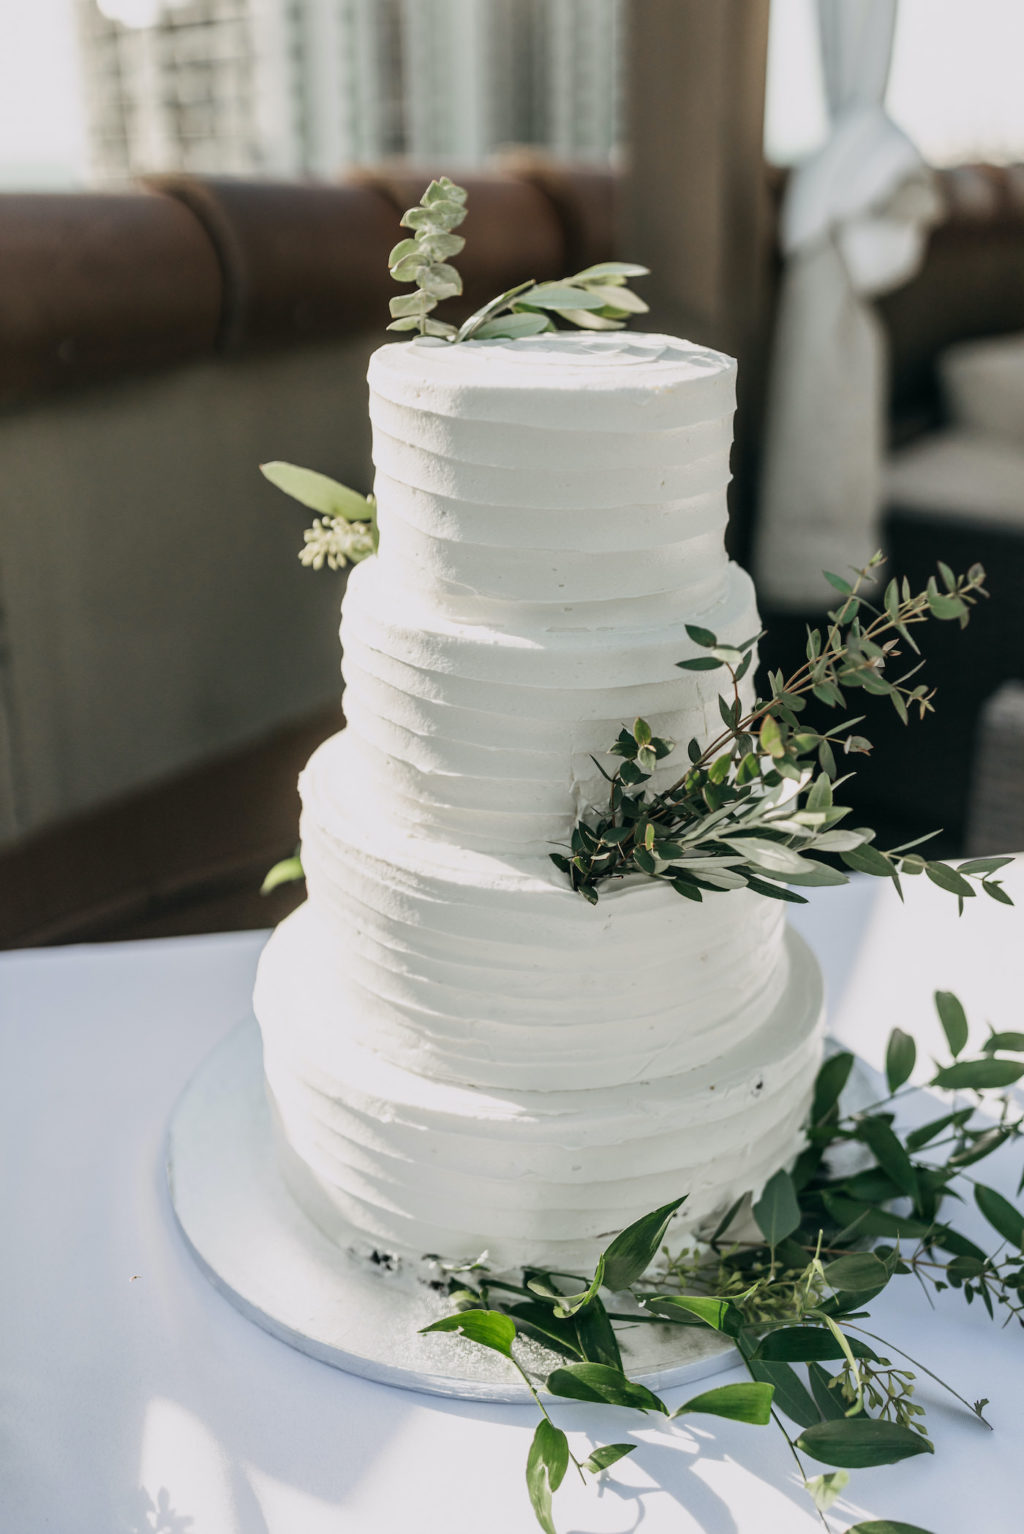 Classic Four Tier Wedding Cake, White Textured Publix Wedding Cake with Floral Accents and Greenery | Florida Boutique Hotel Wedding Venue The Hotel Zamora